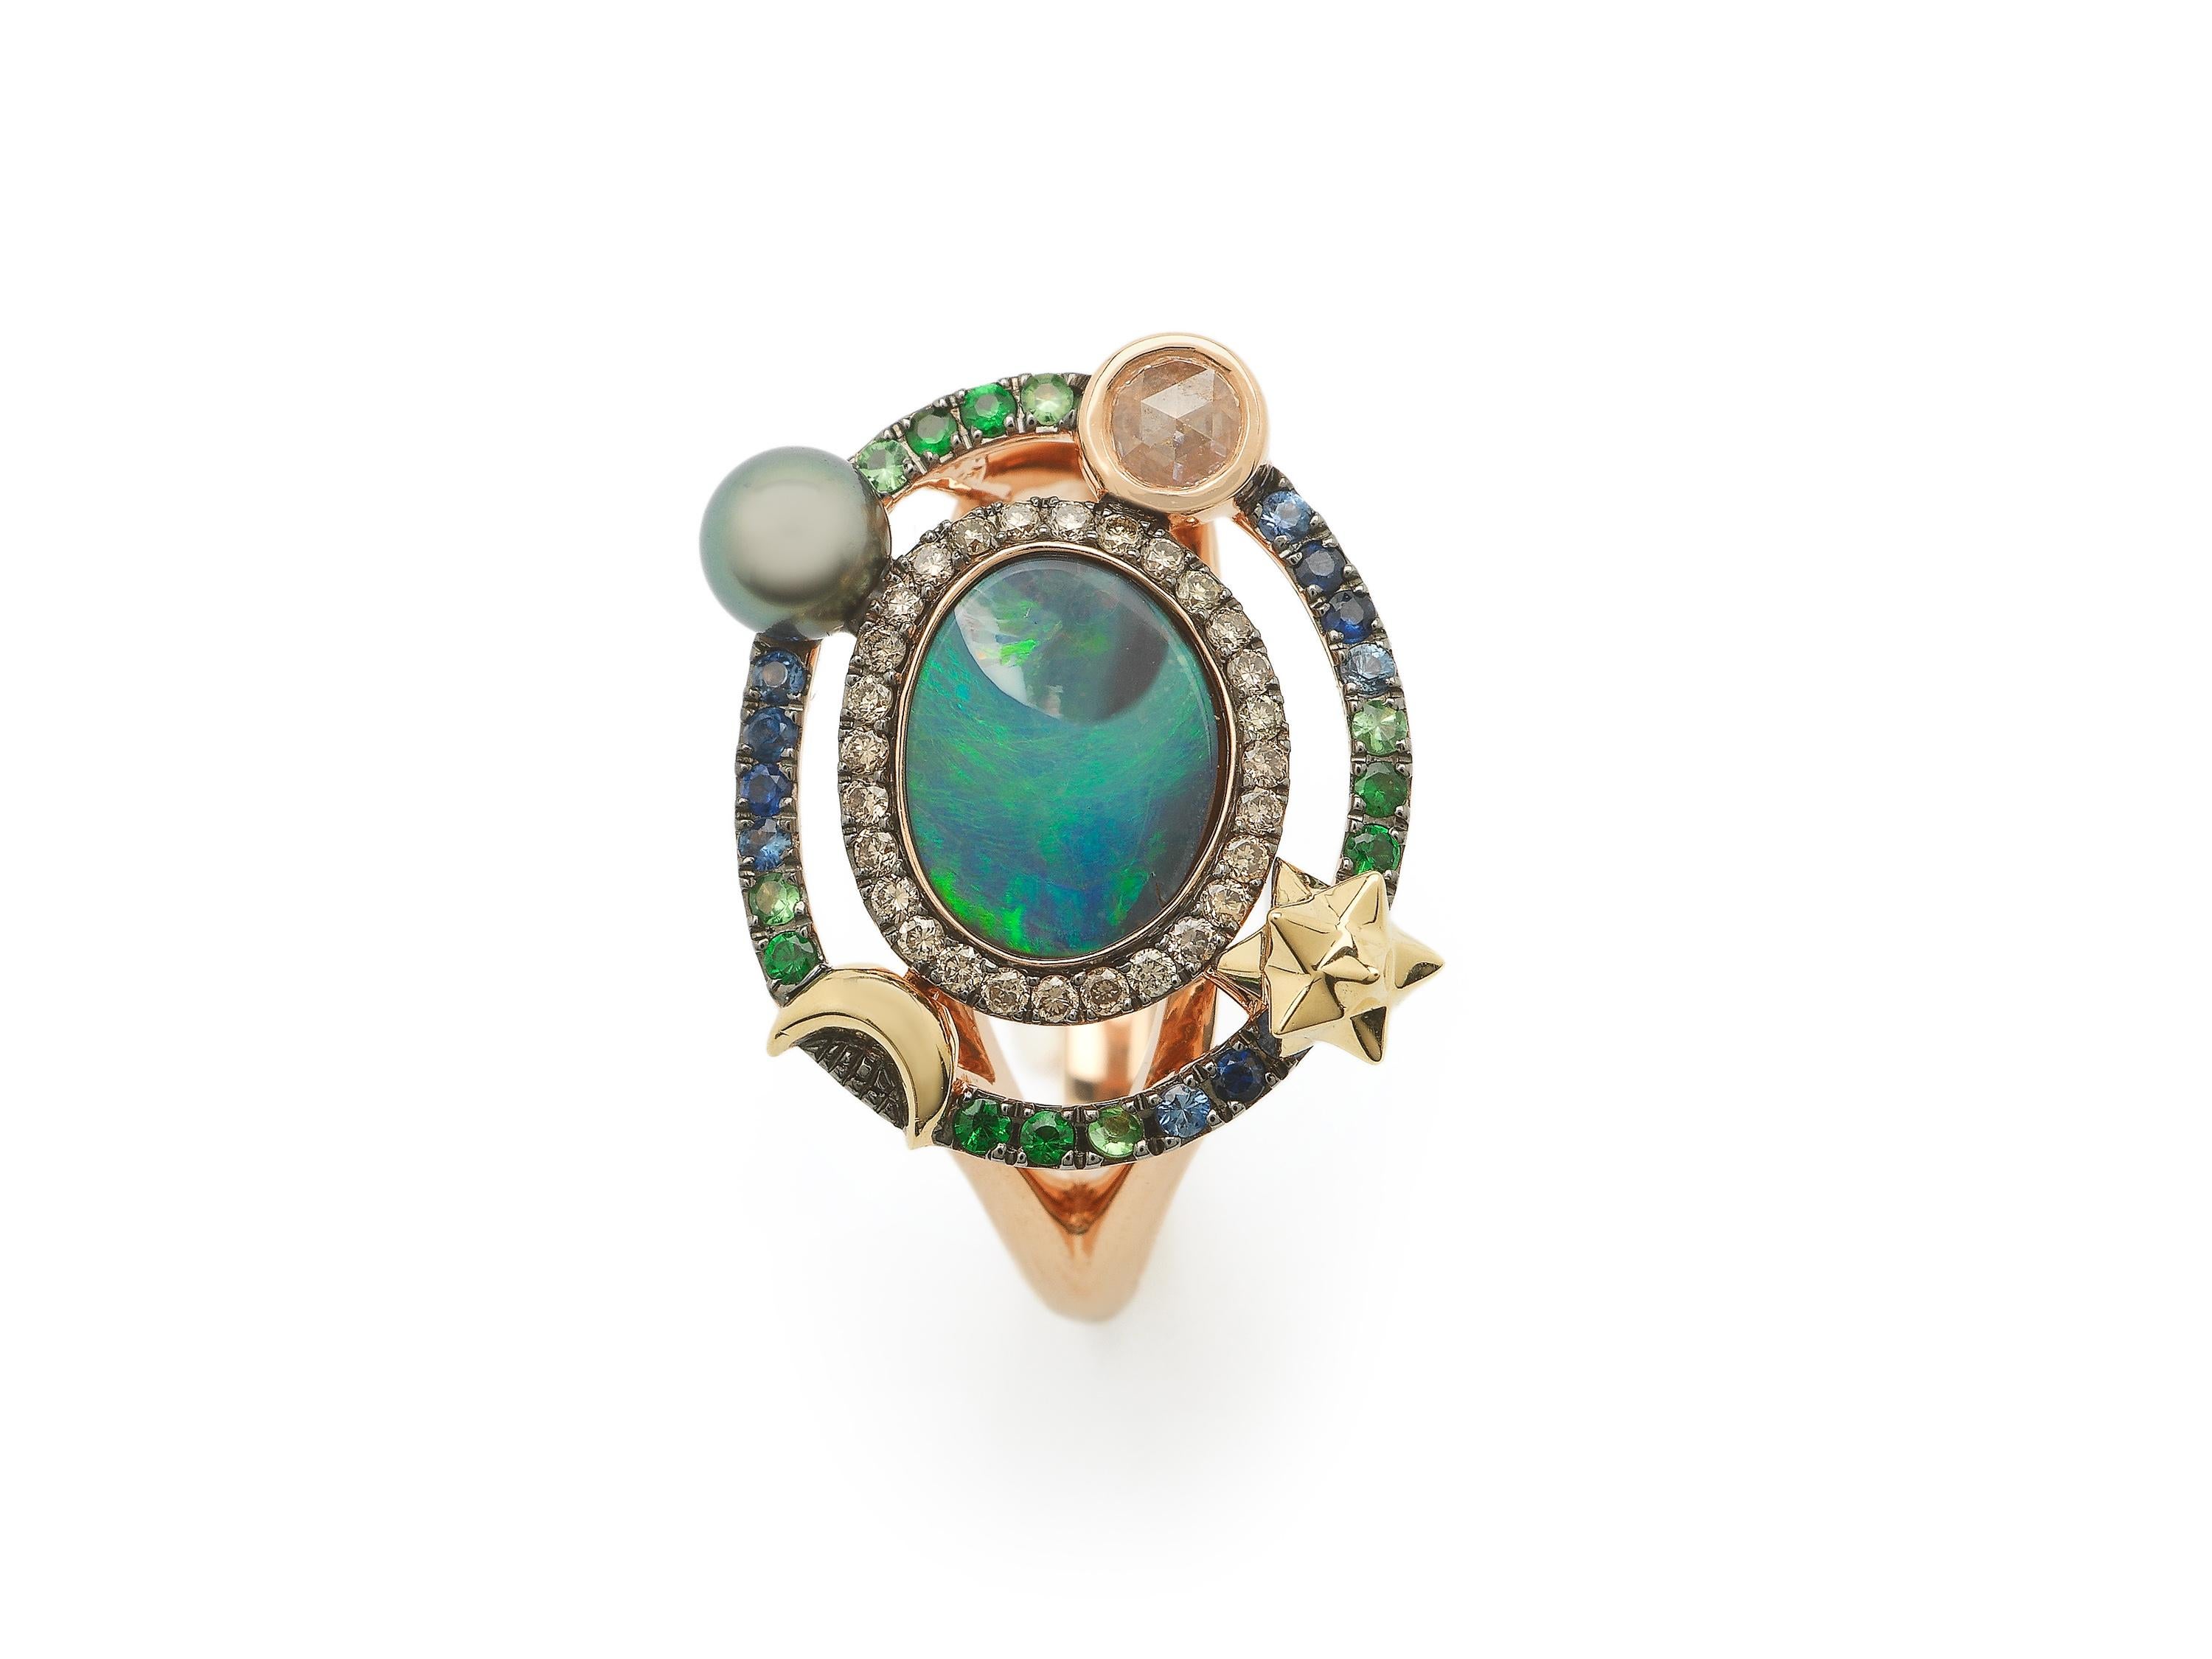 The daintier, but no less striking sibling to the Galaxy Cocktail Ring, this ring is designed in 18k rose and yellow gold, with beautiful opal at its center. With depths that evoke the expanse of the universe, each opal is unique. The stone is